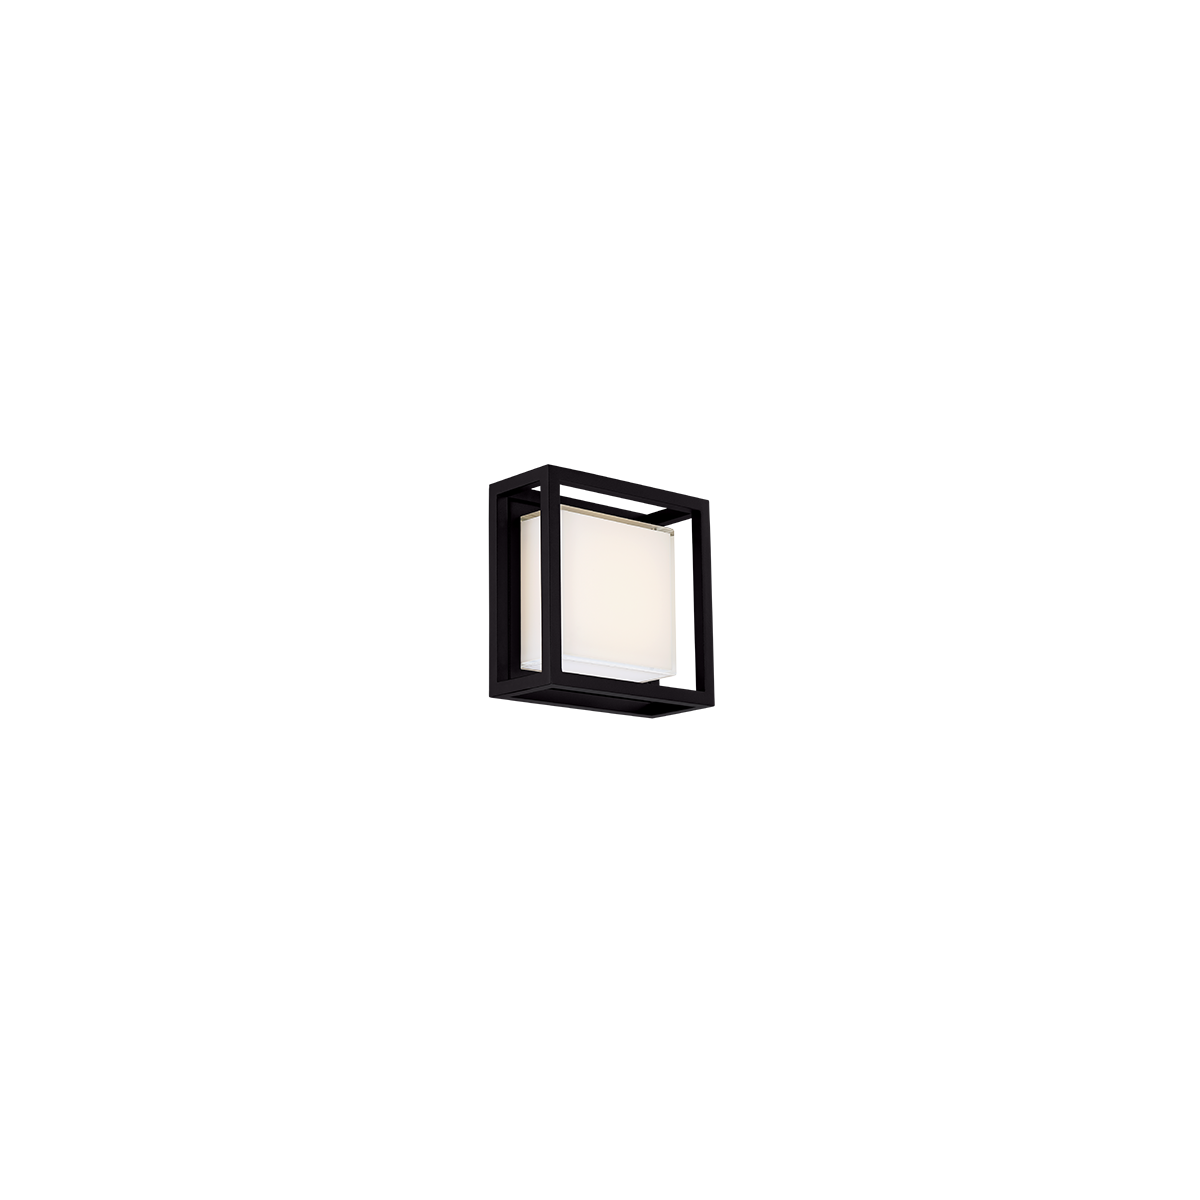 Modern Forms Framed Outdoor Wall Sconce Light